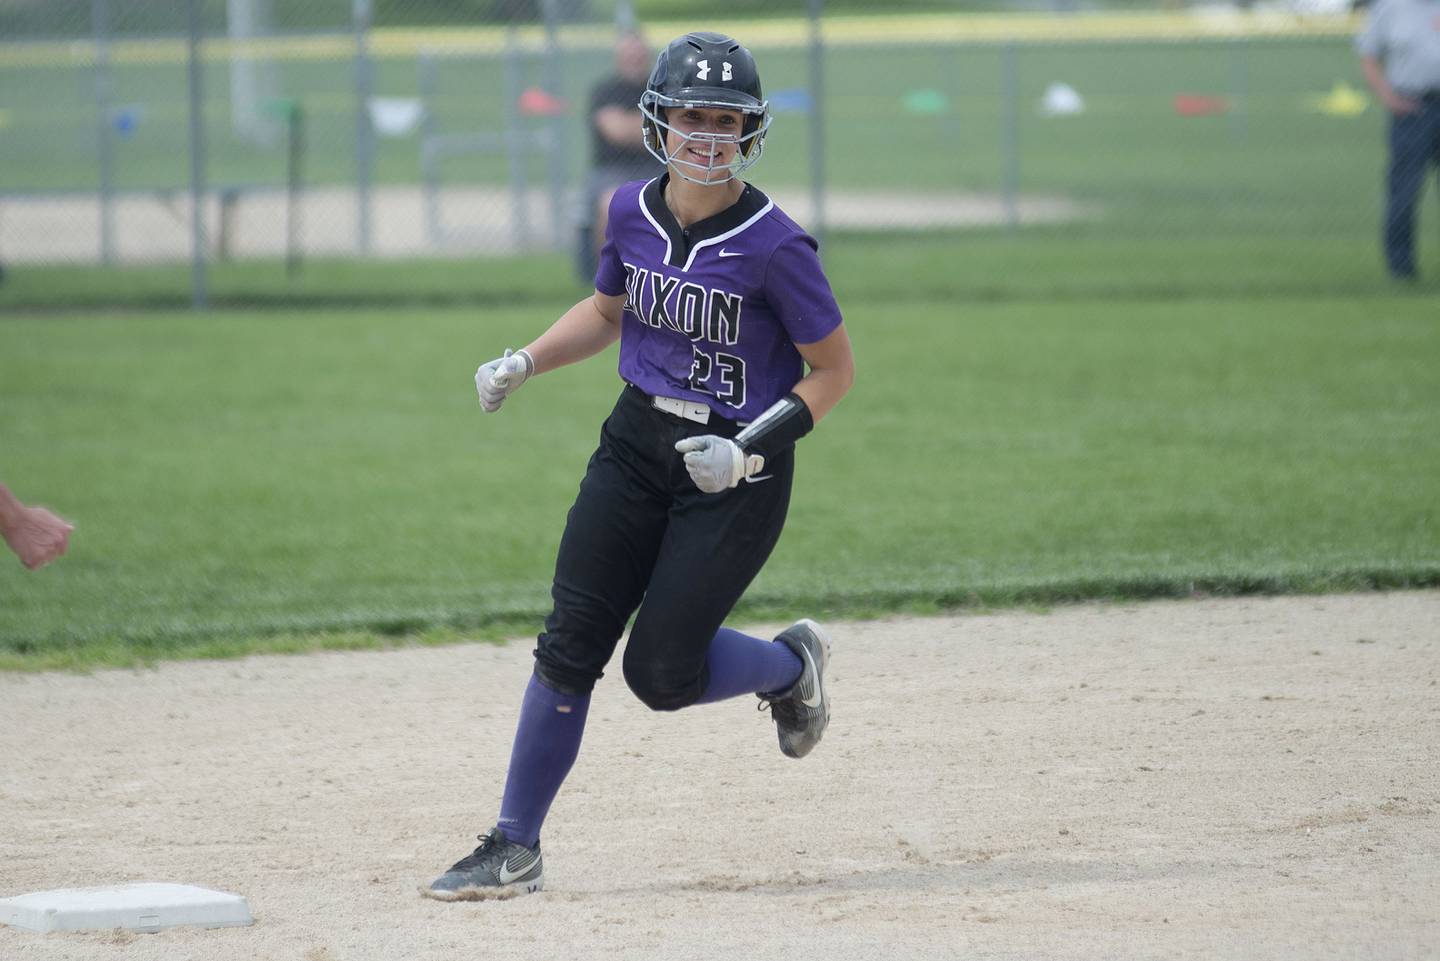 Dixon’s Izzy McCommons cracked a three run homer to tie the game at 6 against Sterling on Saturday, May 28, 2022.